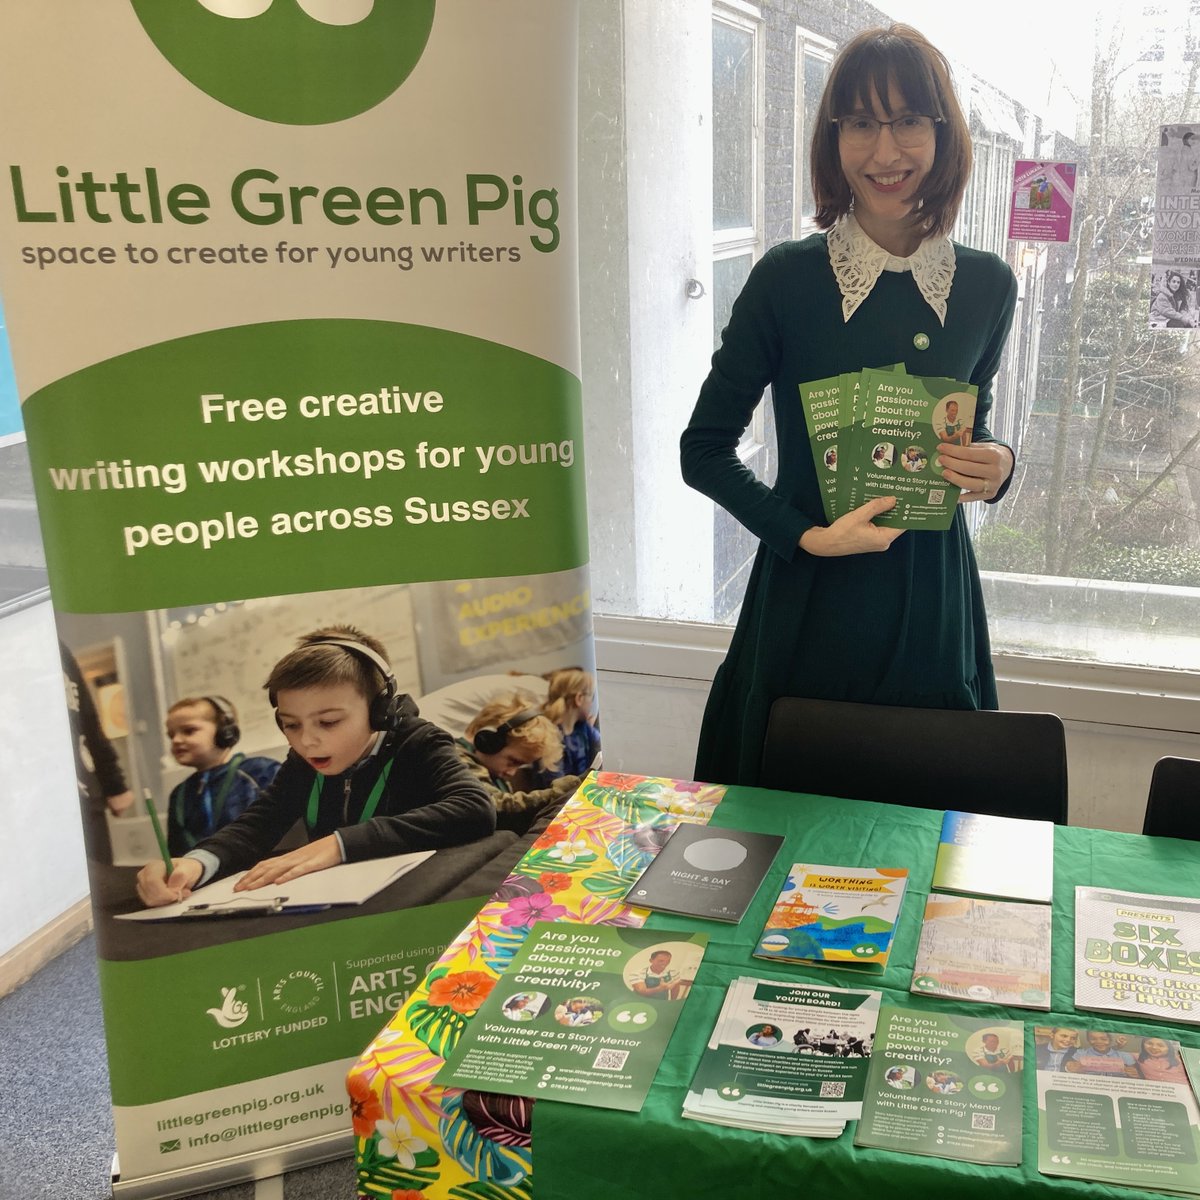 Our Volunteer Manager, Sally, had a great time meeting lots of students at @uniofbrighton yesterday. Thanks to the lovely @uniofbrightoncs team for hosting our recruitment stall. We're always looking for new volunteer Story Mentors so please check out our website for details.